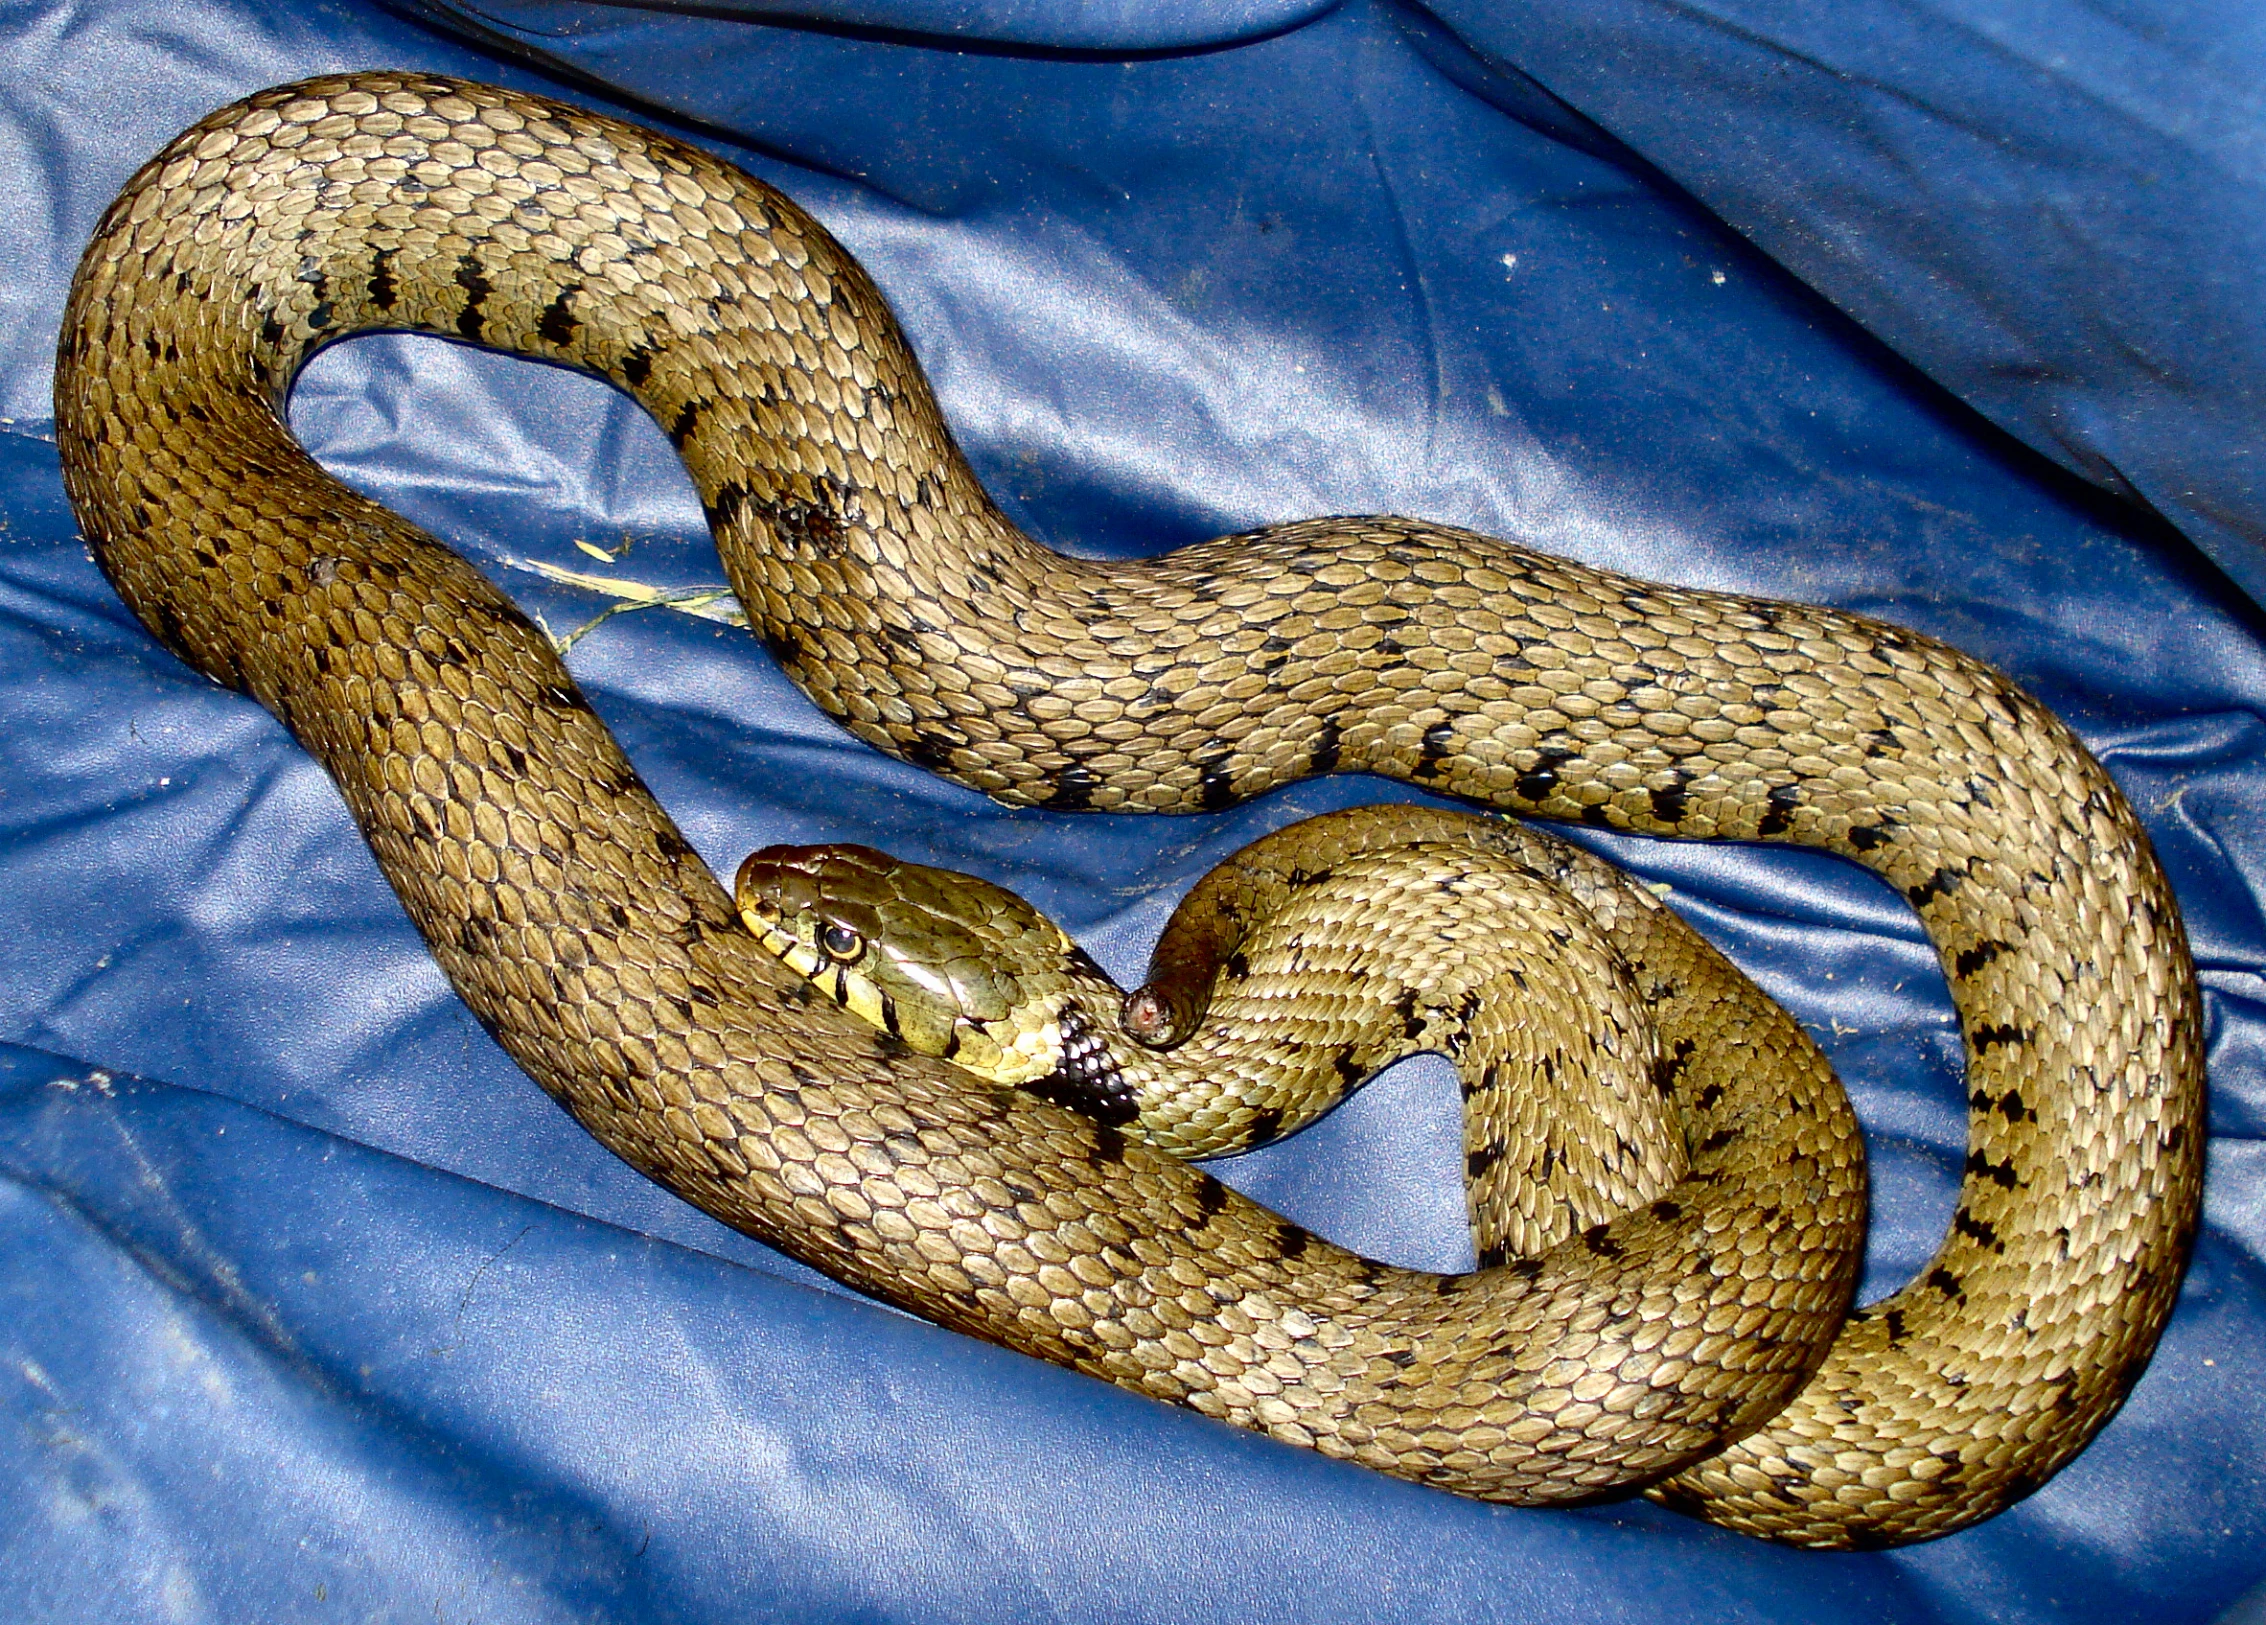 a large brown snake sitting on top of blue cloth